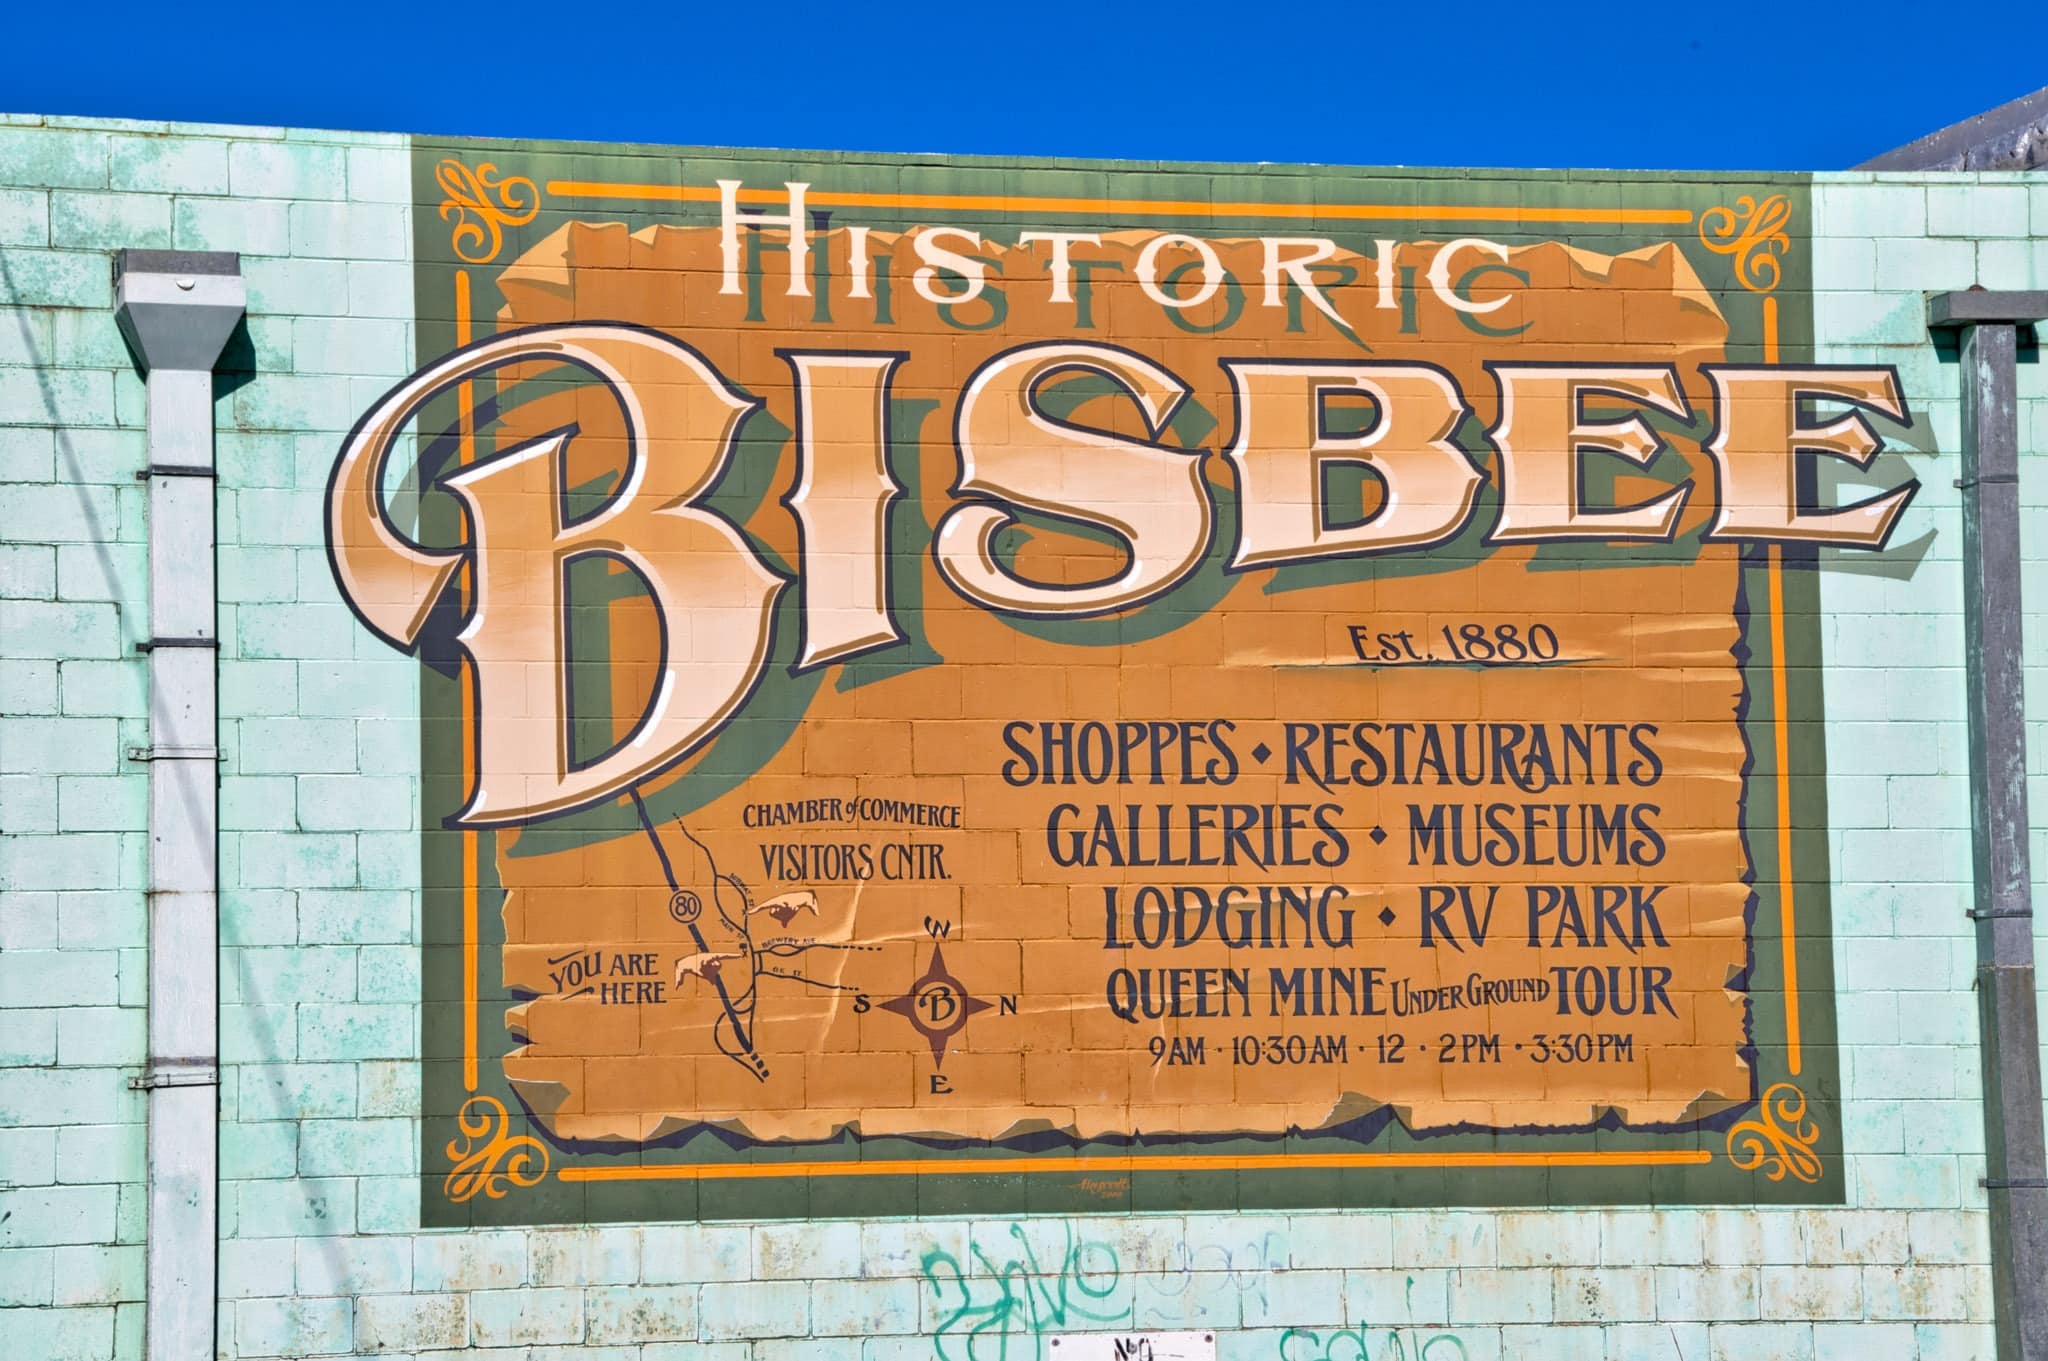 This sign painted on a building at the intersection of Tombstone Canyon Road, Commerce Street, and Main Street welcomes visitors to Bisbee, Arizona.